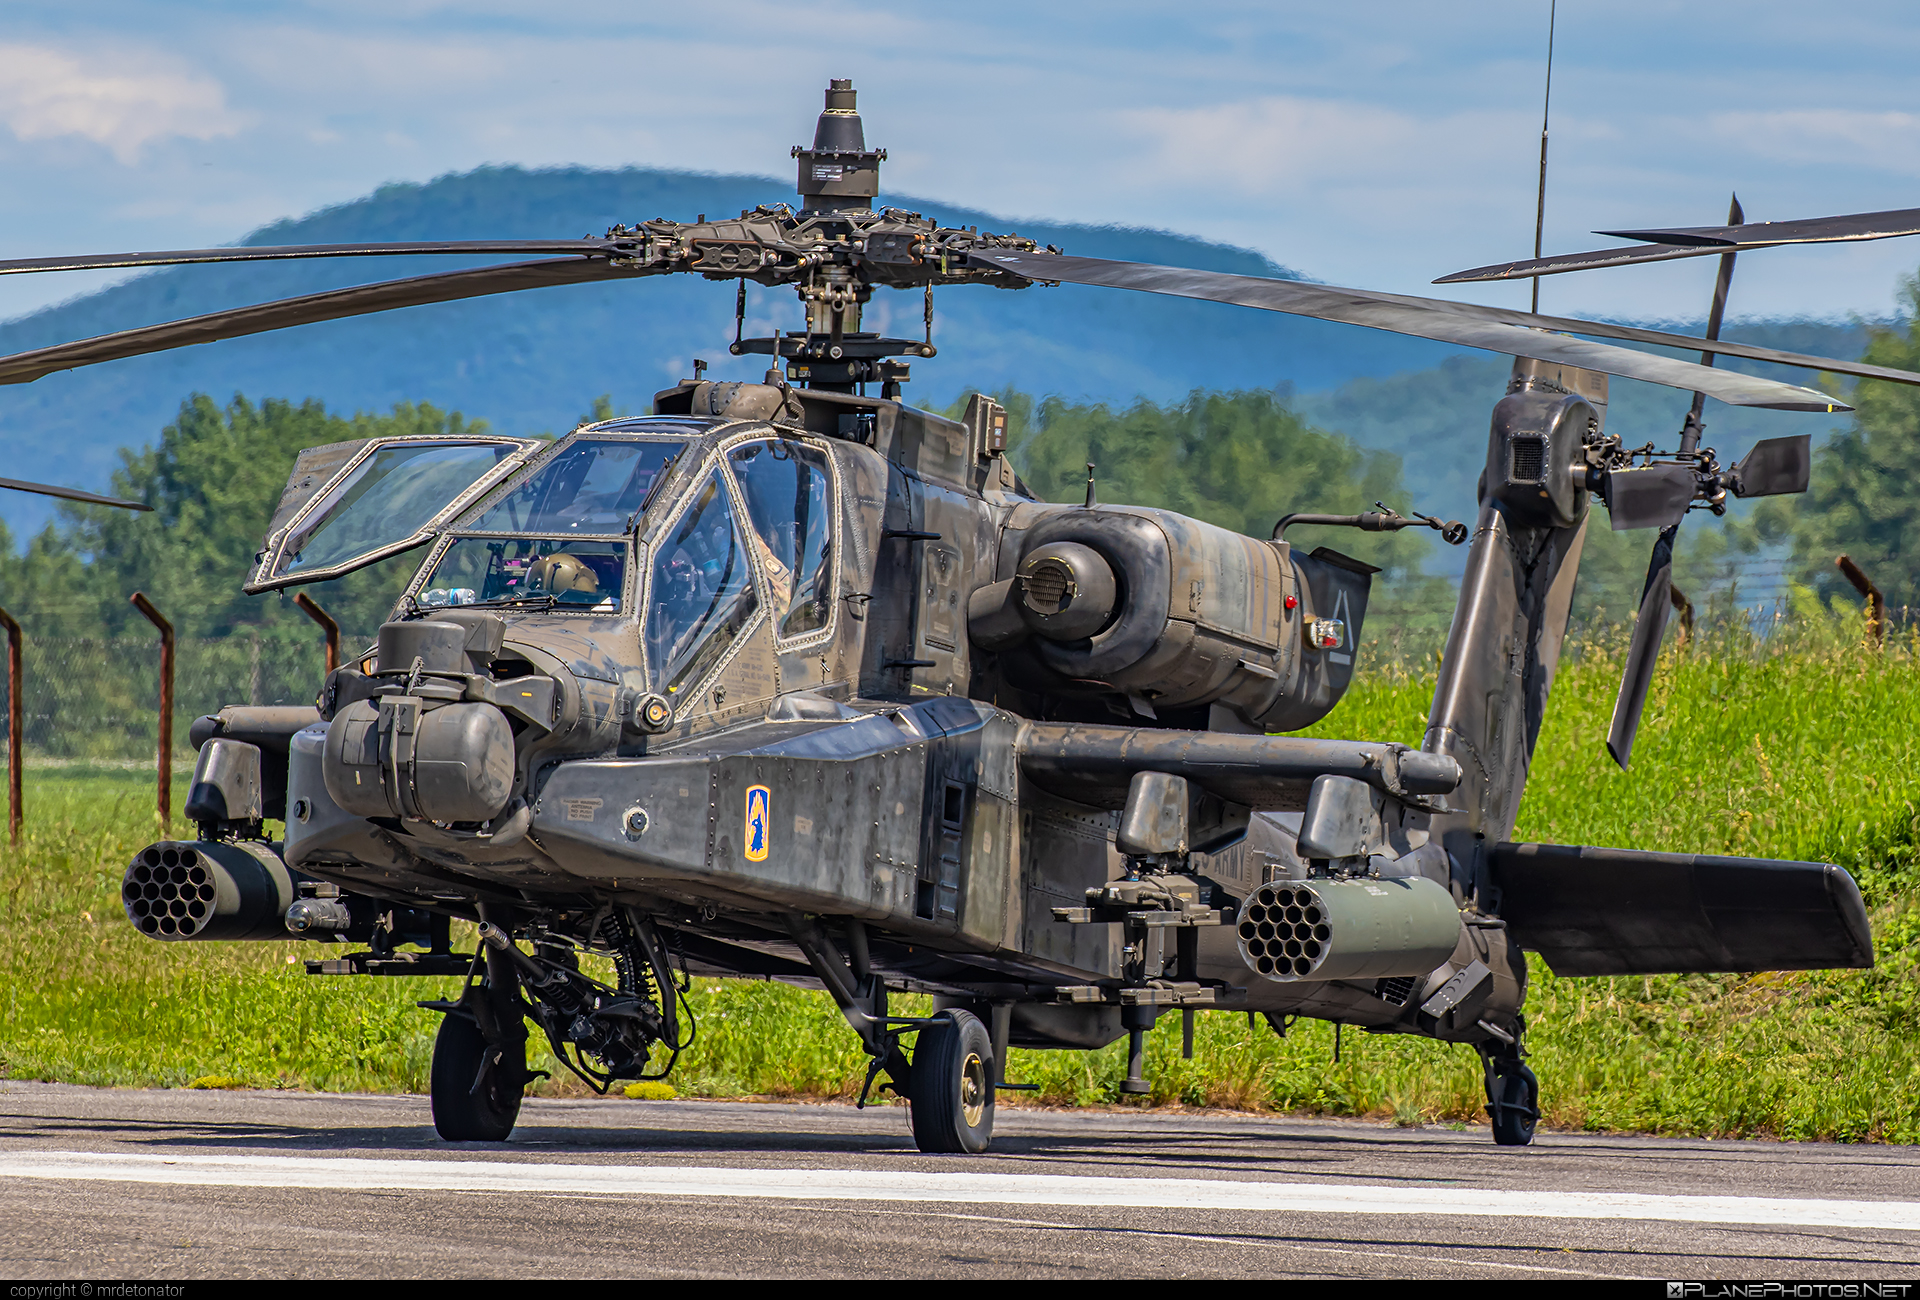 Boeing AH-64D Apache Longbow - 04-05426 operated by US Army #boeing #usarmy